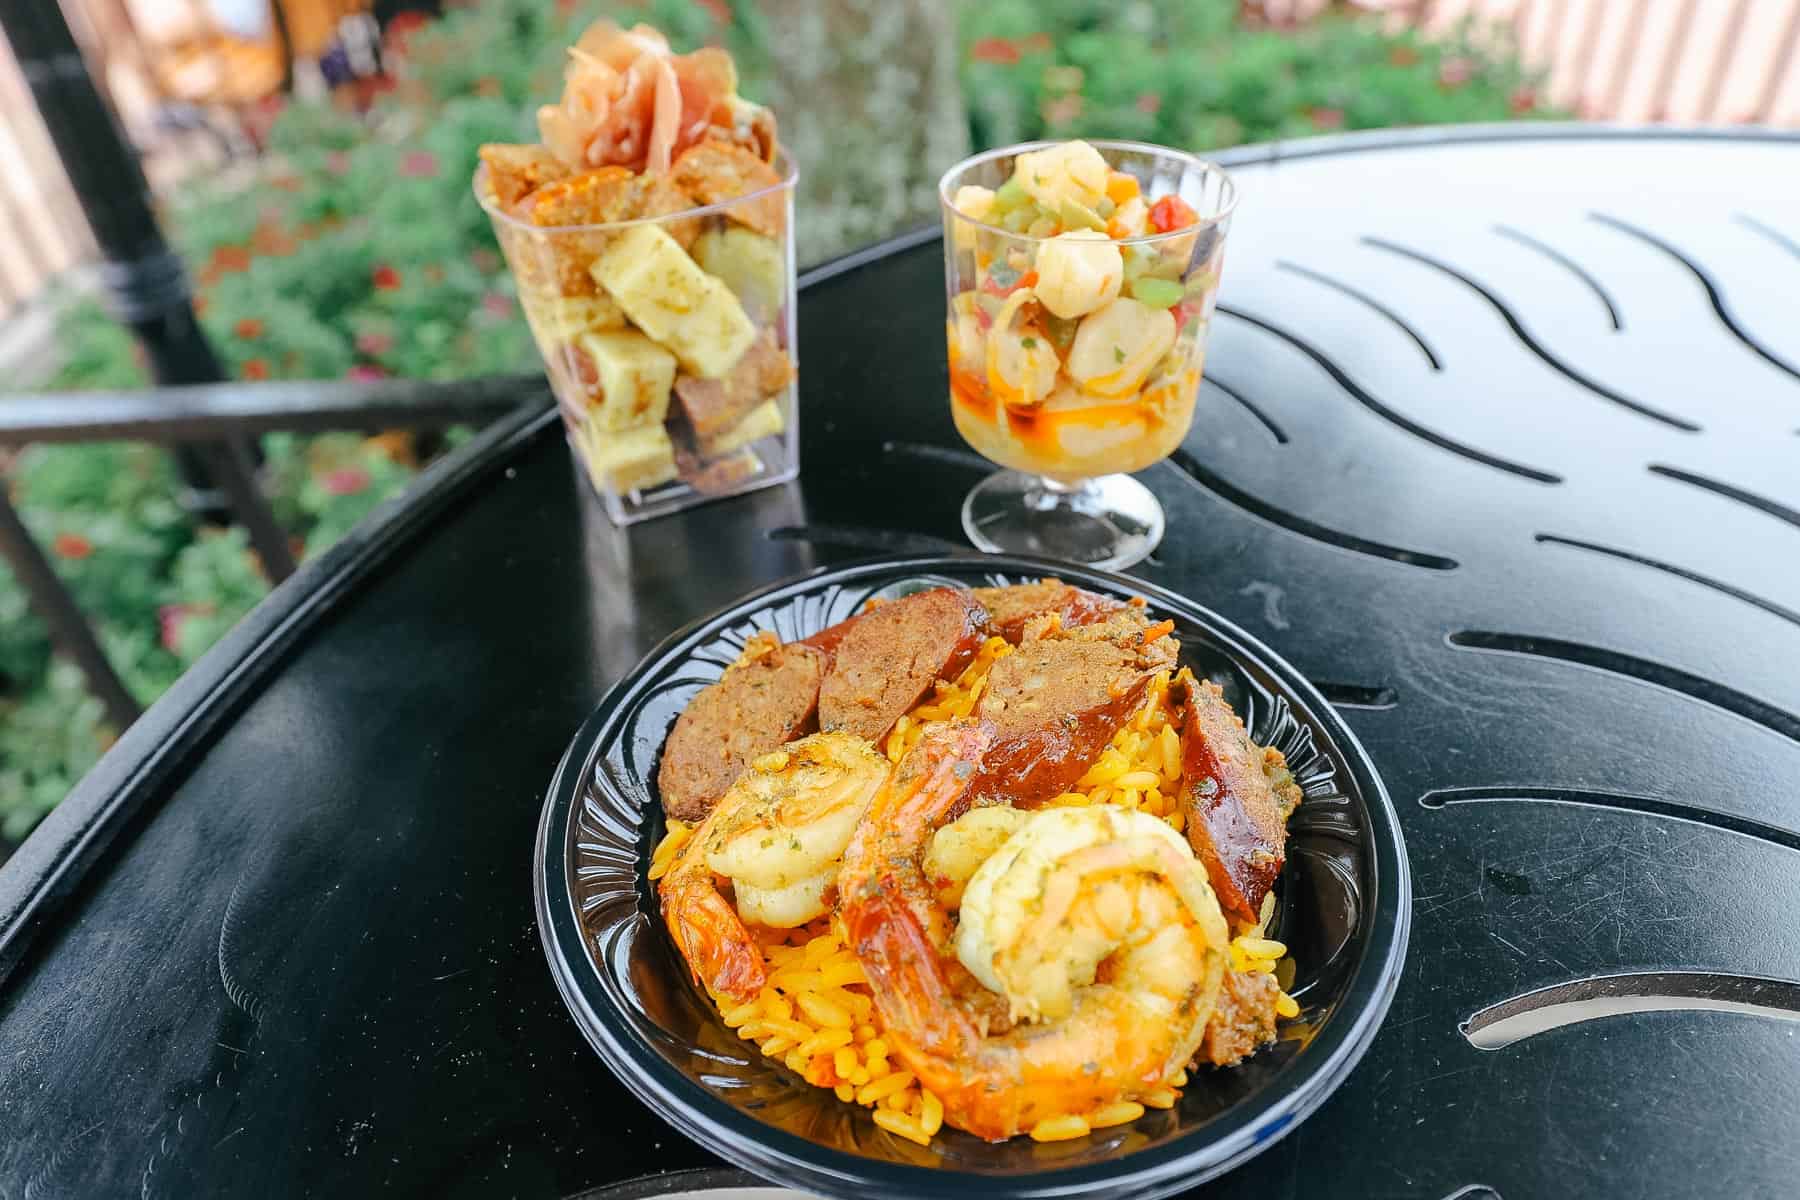 Spain Marketplace Review (Epcot Food and Wine Festival)